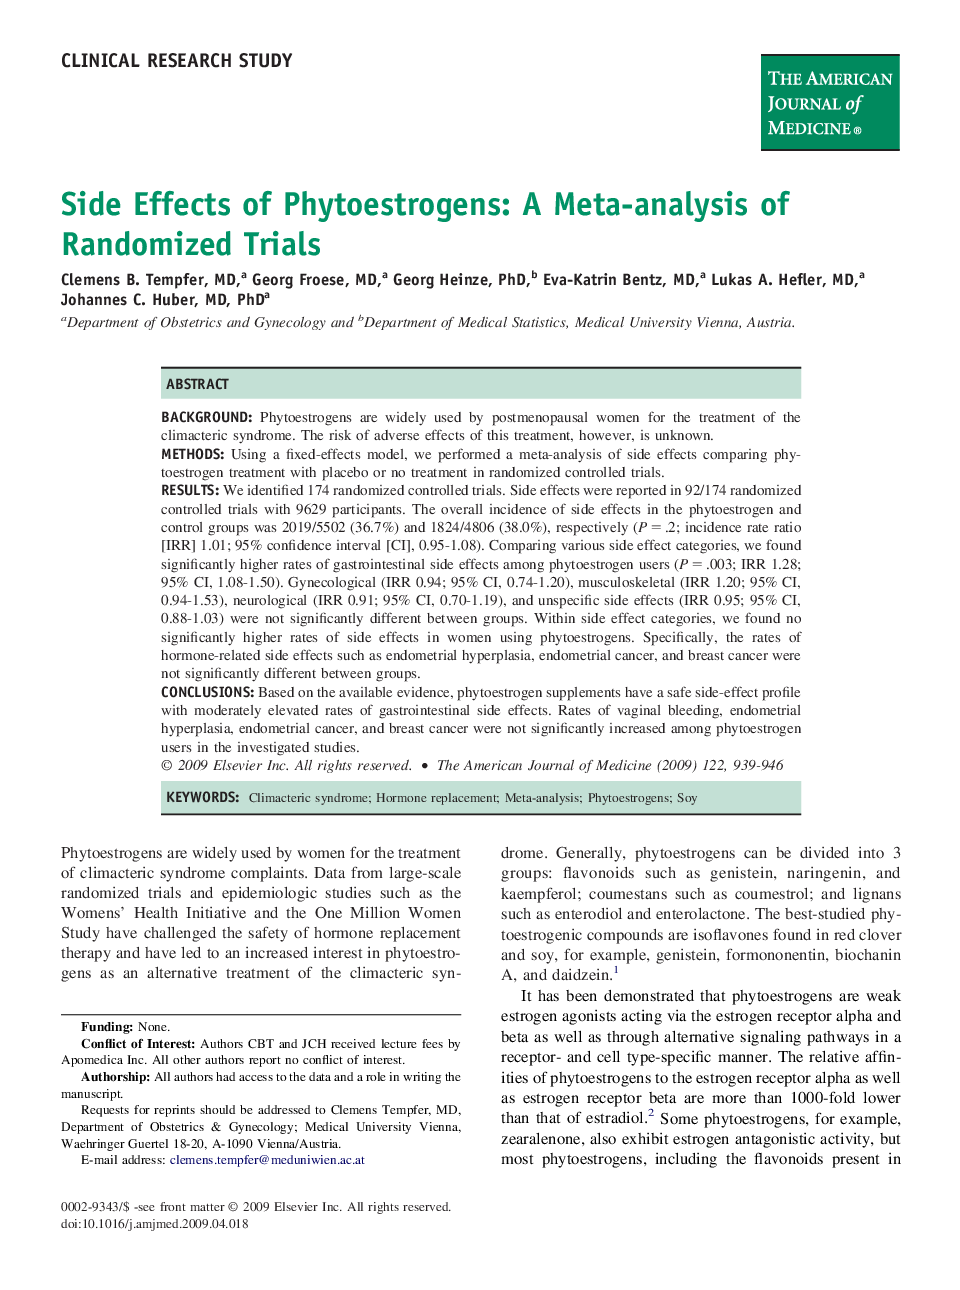 Side Effects of Phytoestrogens: A Meta-analysis of Randomized Trials